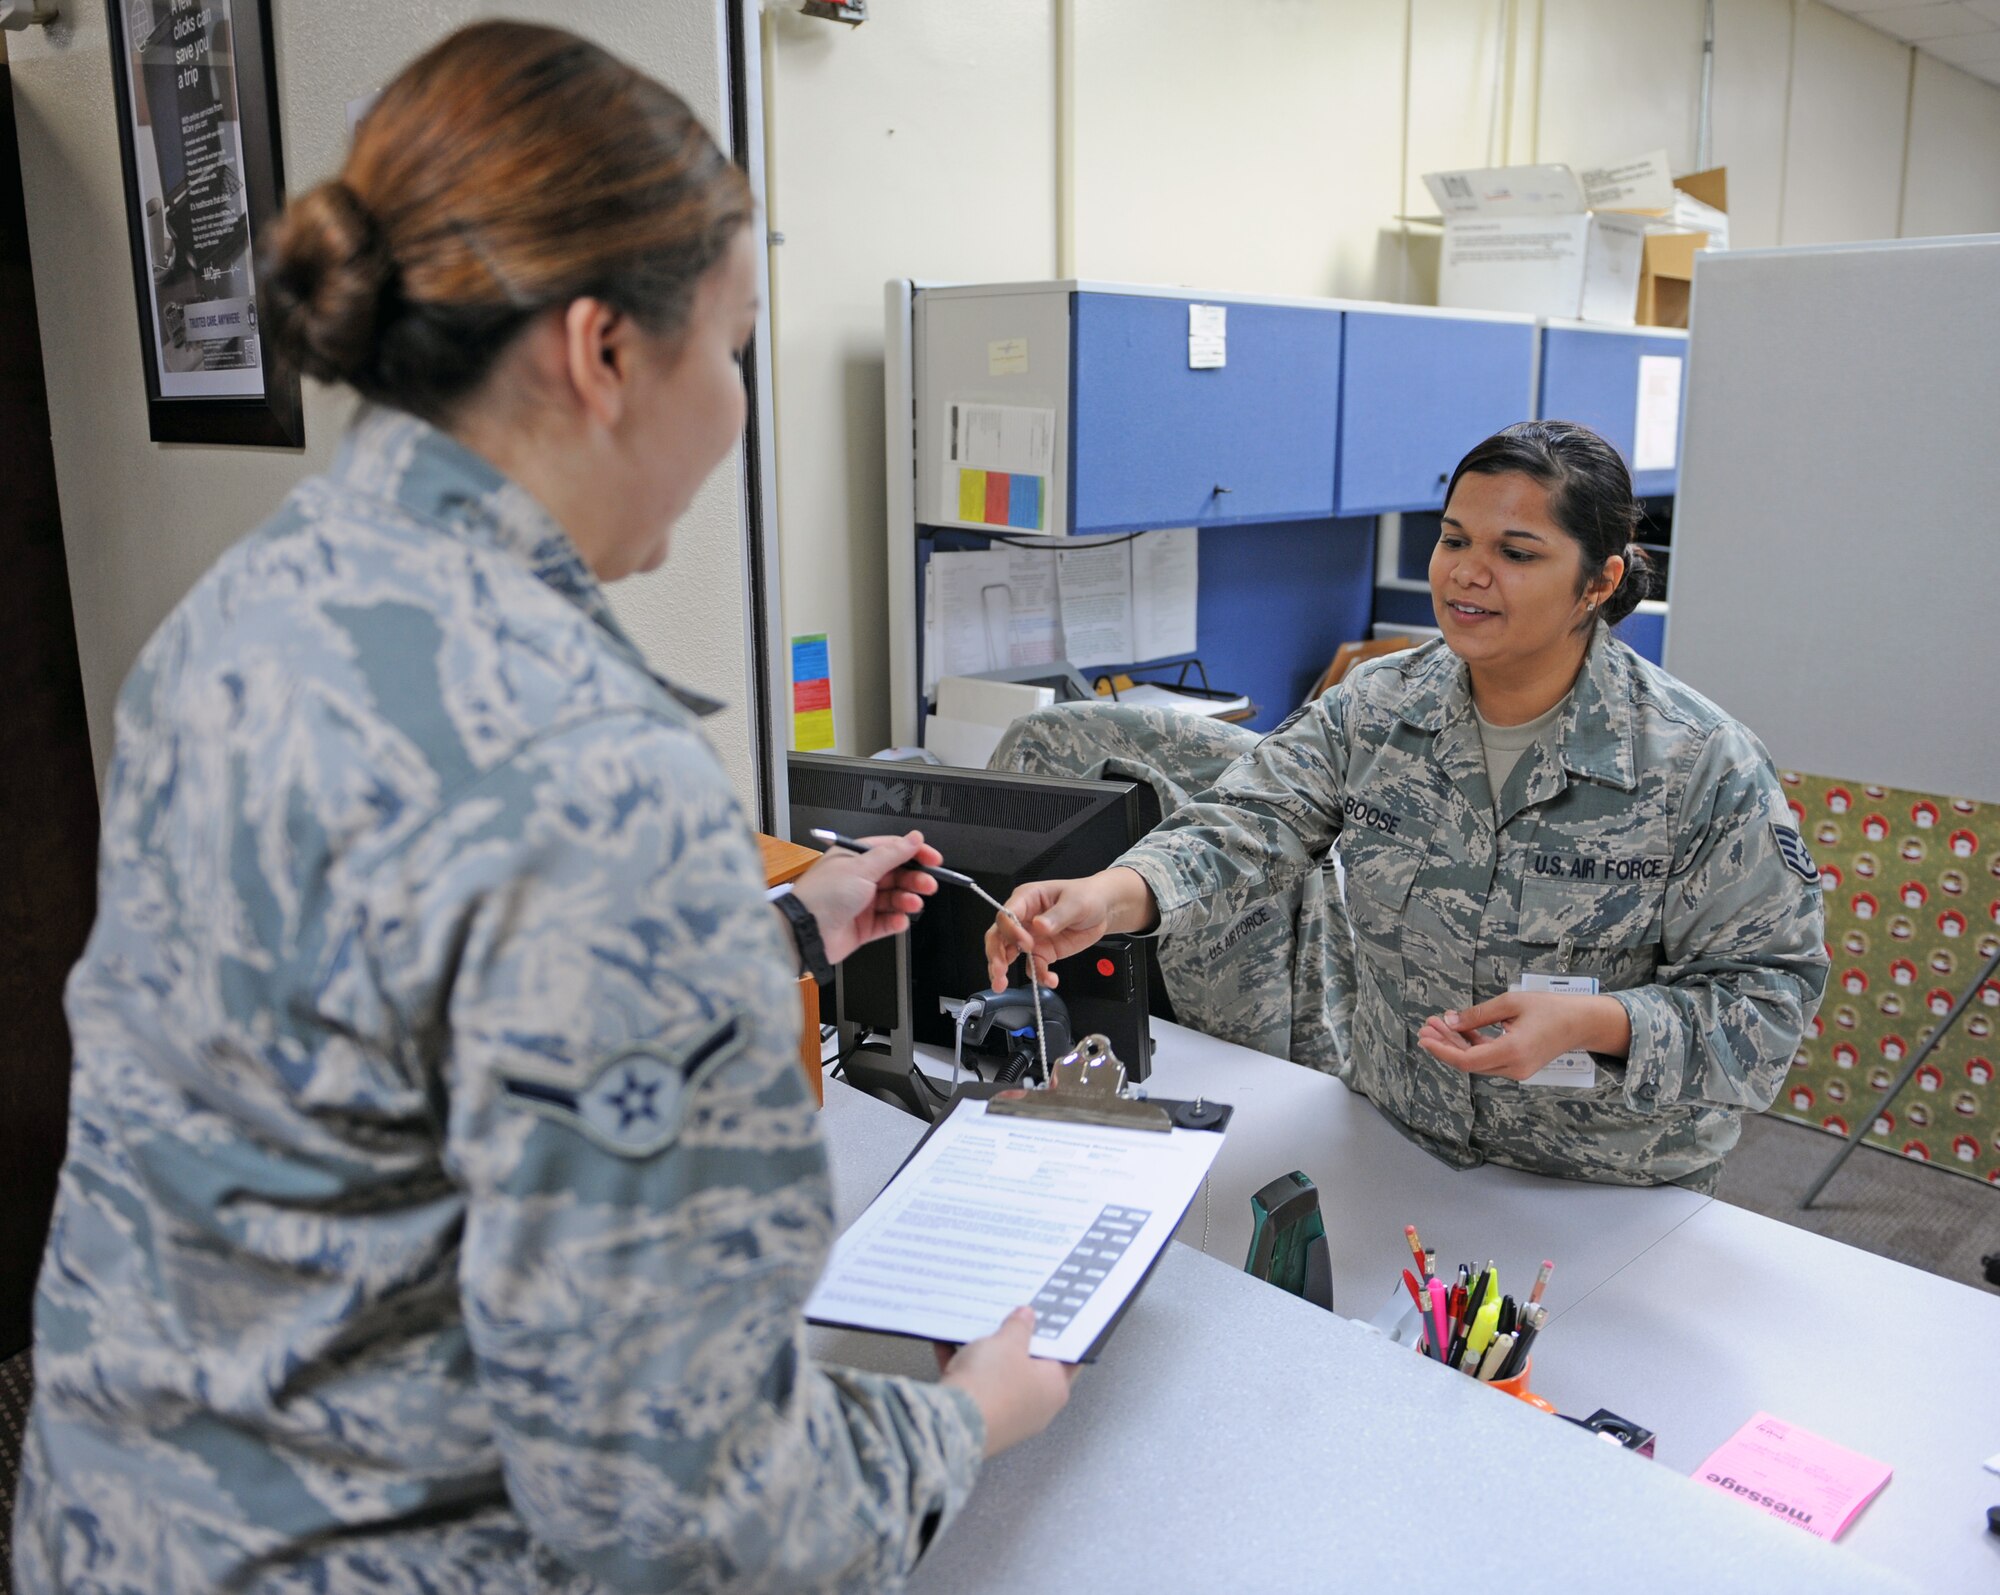 U.S. Air Force Staff Sgt. Soni Boose, 7th Medical Group, helps an Airman fill out paperwork Dec. 19, 2013, at Dyess Air Force Base, Texas. The Self Initiated Care Kit is a new program offered by the MDG that allows Airmen, their dependents and retirees already receiving pharmaceutical benefits under Tricare to access free over-the-counter medication without requiring an appointment at the clinic. To access the over-the-counter medication, individuals fill out a form located in the pharmacy or online (http://www.dyess.af.mil/library/factsheets/factsheet.asp?id=22835), and select the medication they need. (U.S. Air Force photo by Airman 1st Class Kedesha Pennant/Released)